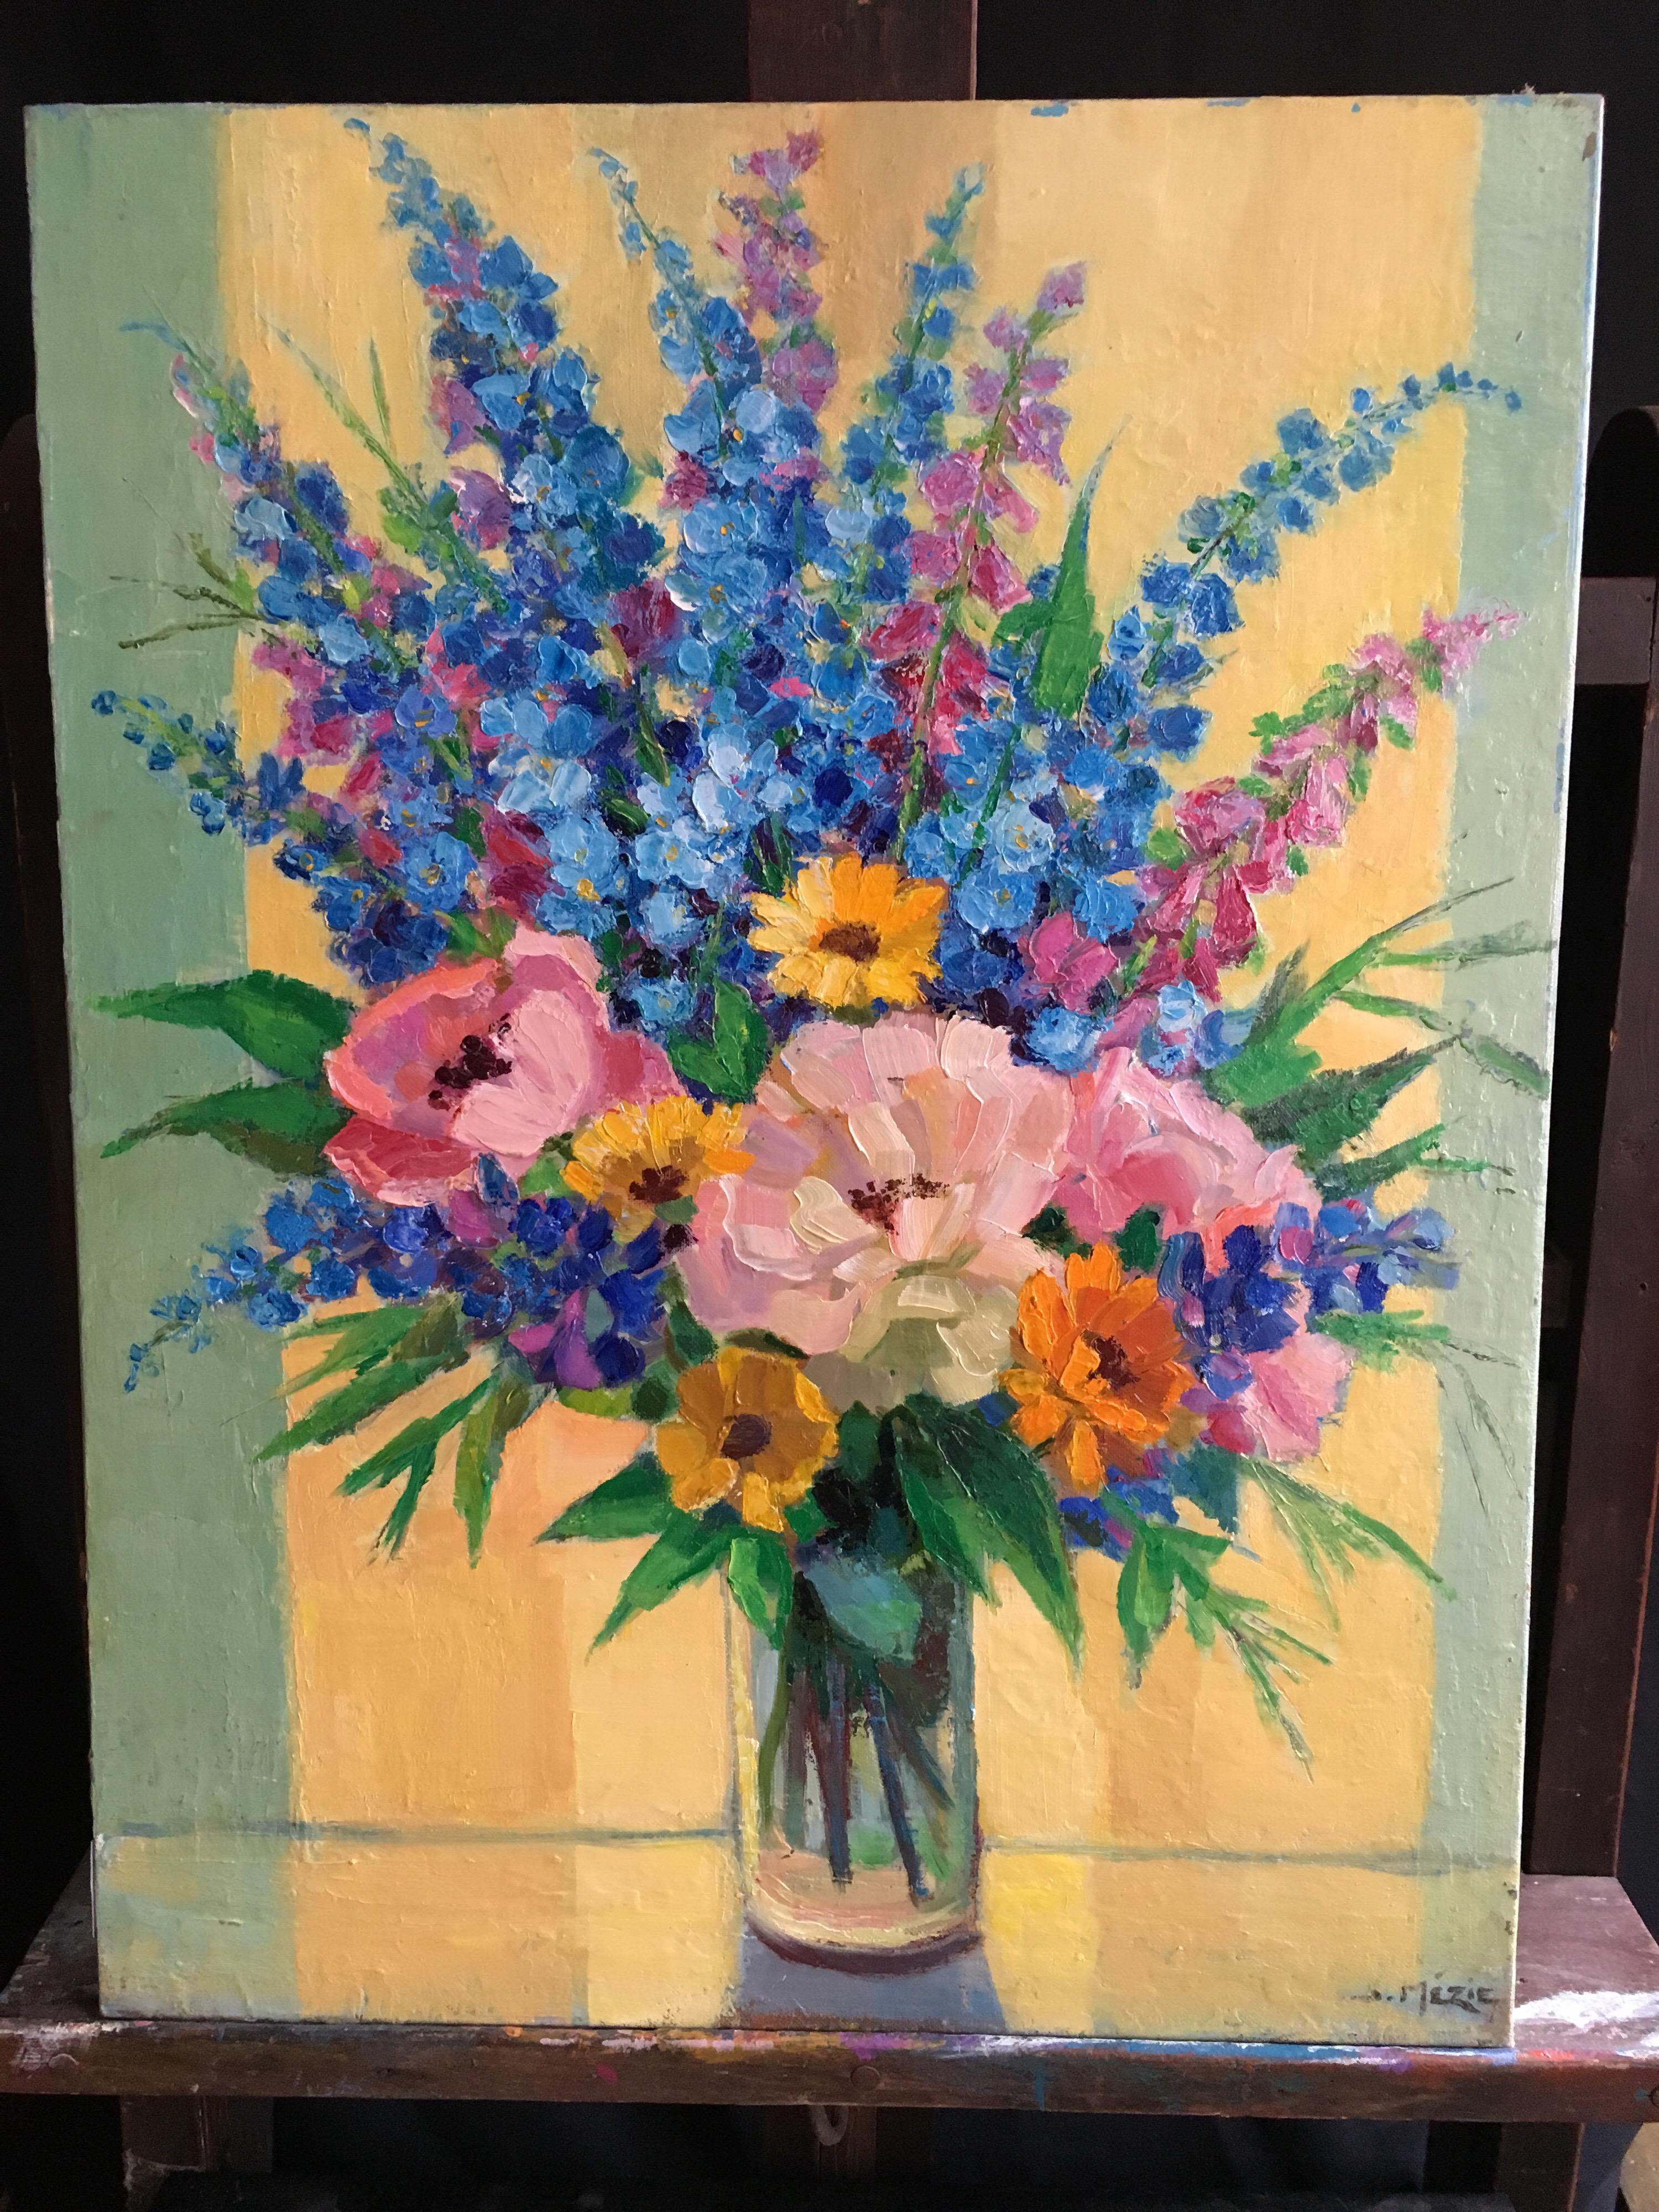 Brimming Bouquet of Flowers, French Oil Painting, Signed
By French artist Suzette Mezie, Mid 20th Century
Signed by the artist on the lower right hand corner 
Oil painting on canvas, unframed
Canvas size: 25.5 x 19.5 inches

Wonderfully bright and